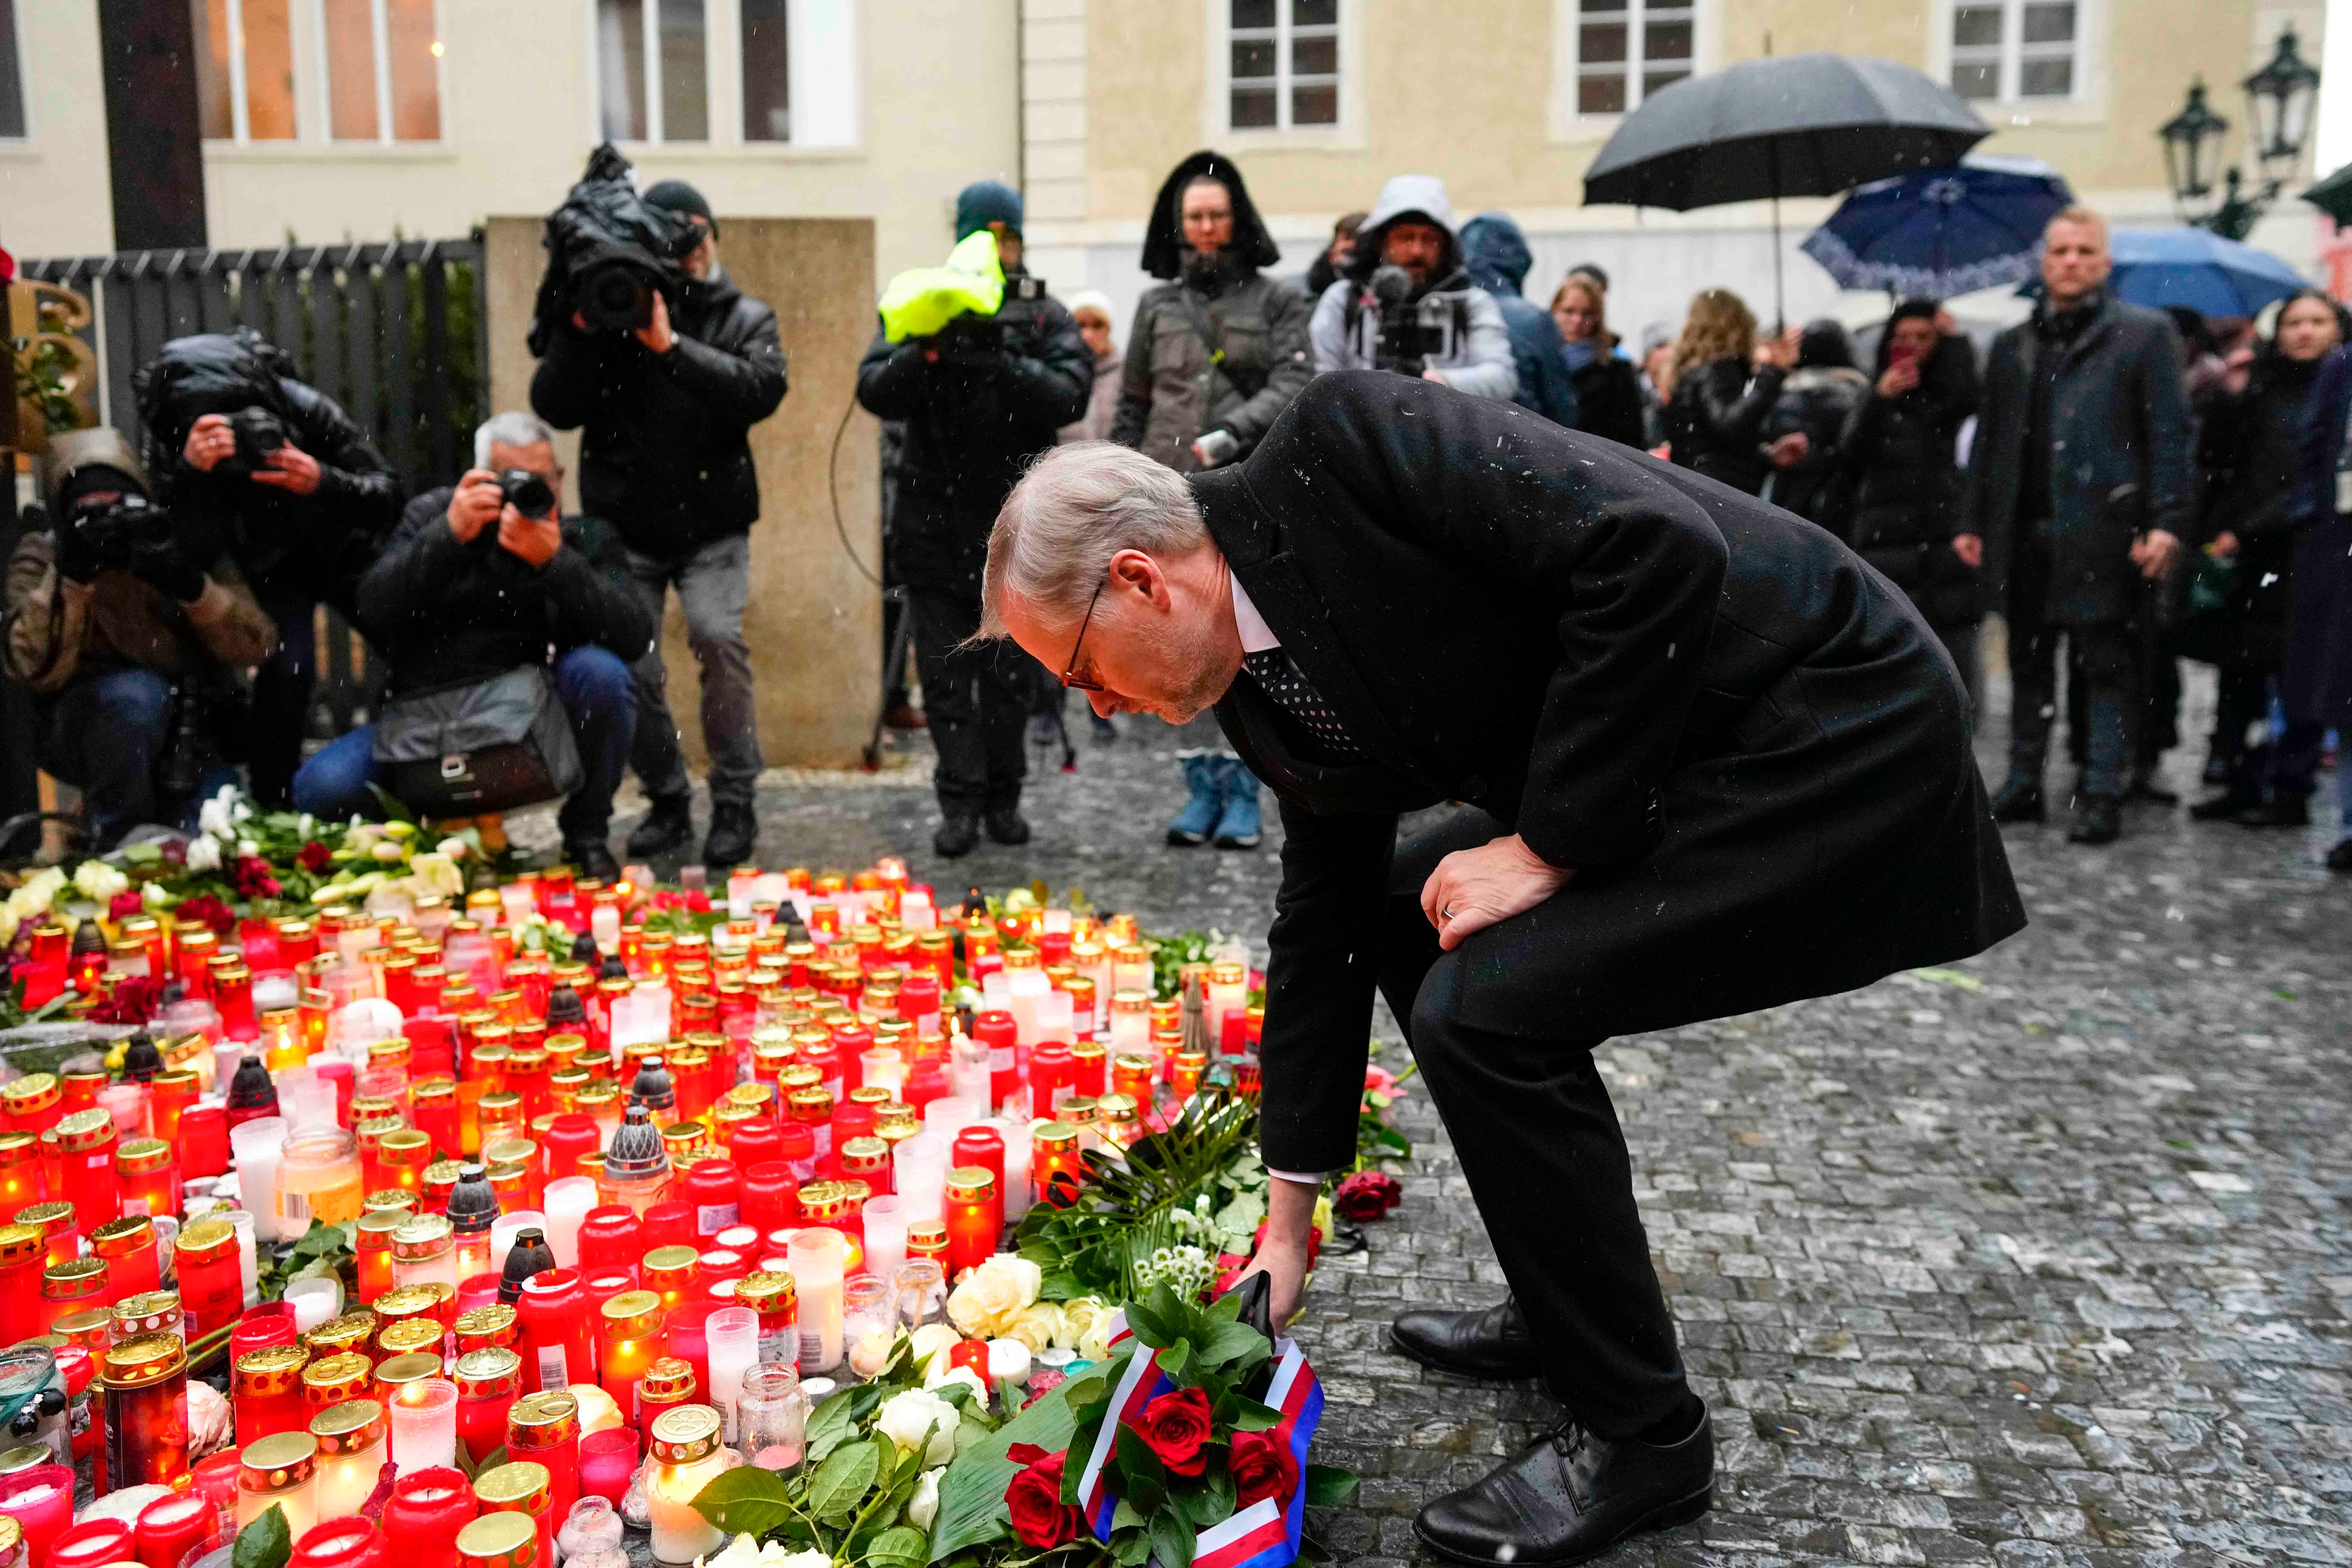 Czech Republic’s prime minister Petr Fiala was among those to lay flowers this morning